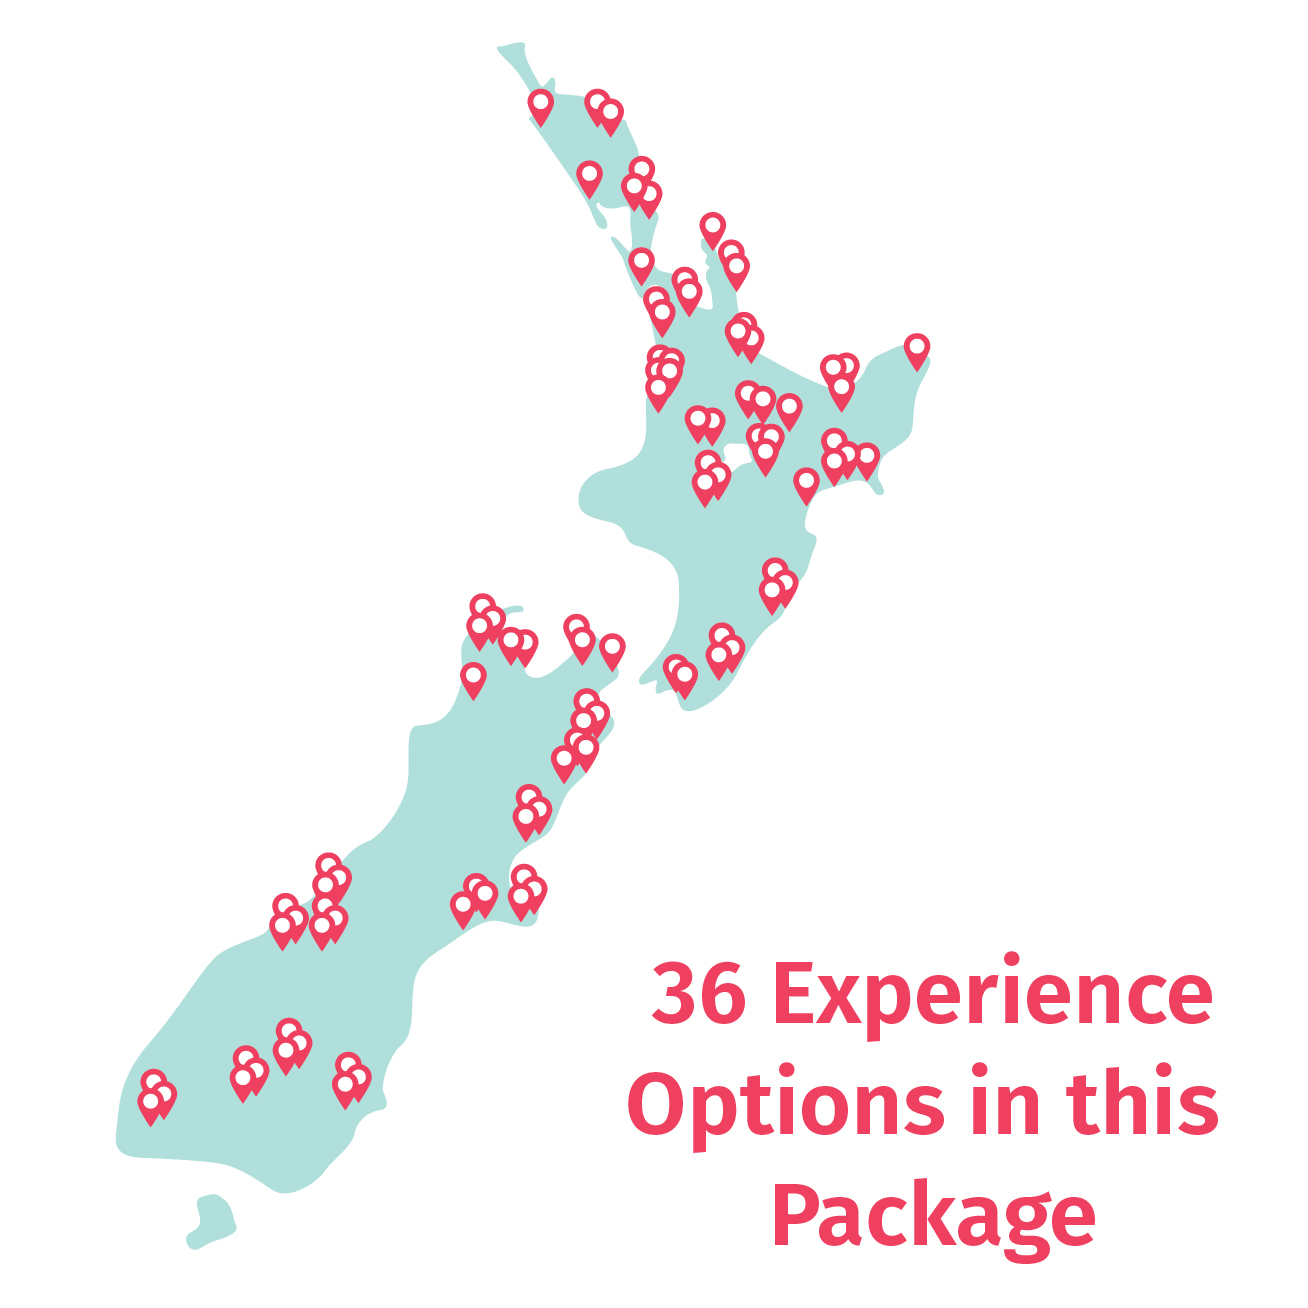 35 experience options included in this package